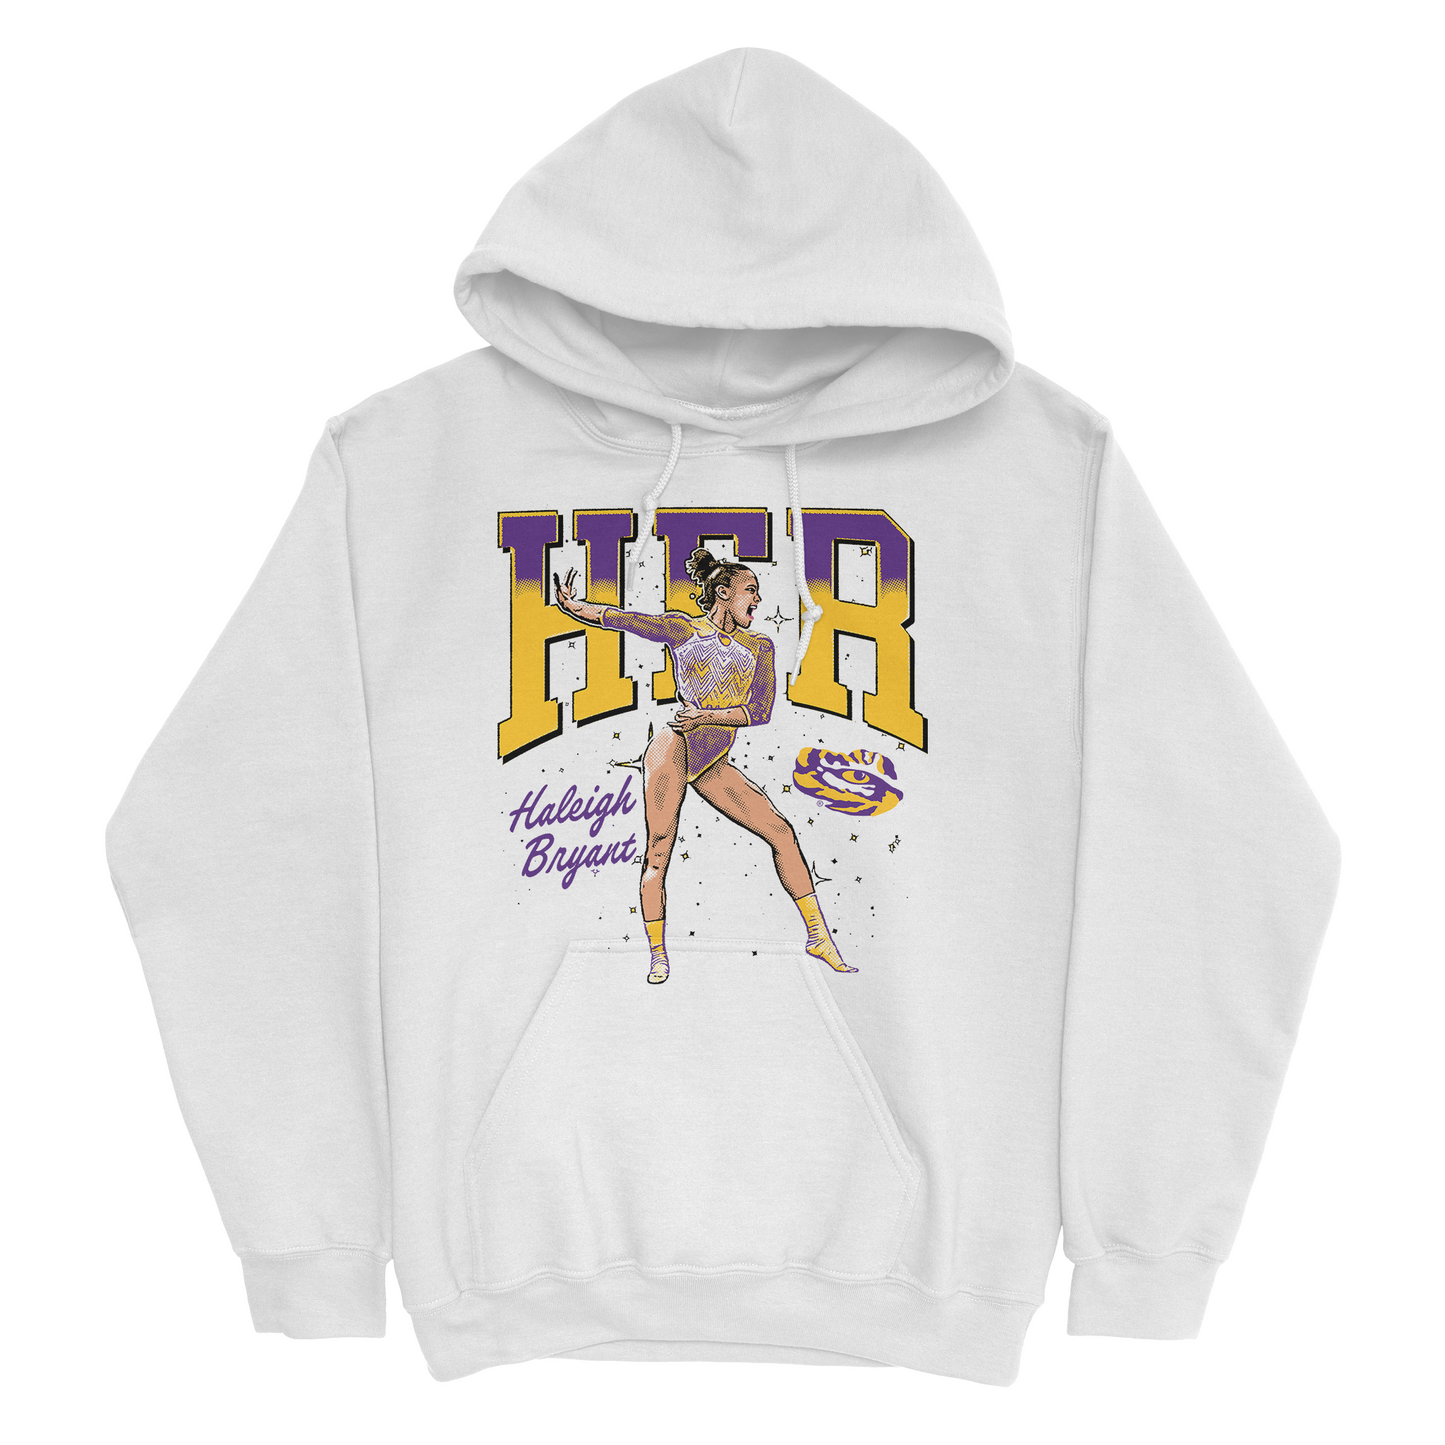 EXCLUSIVE RELEASE: Haleigh Bryant - HER Hoodie White